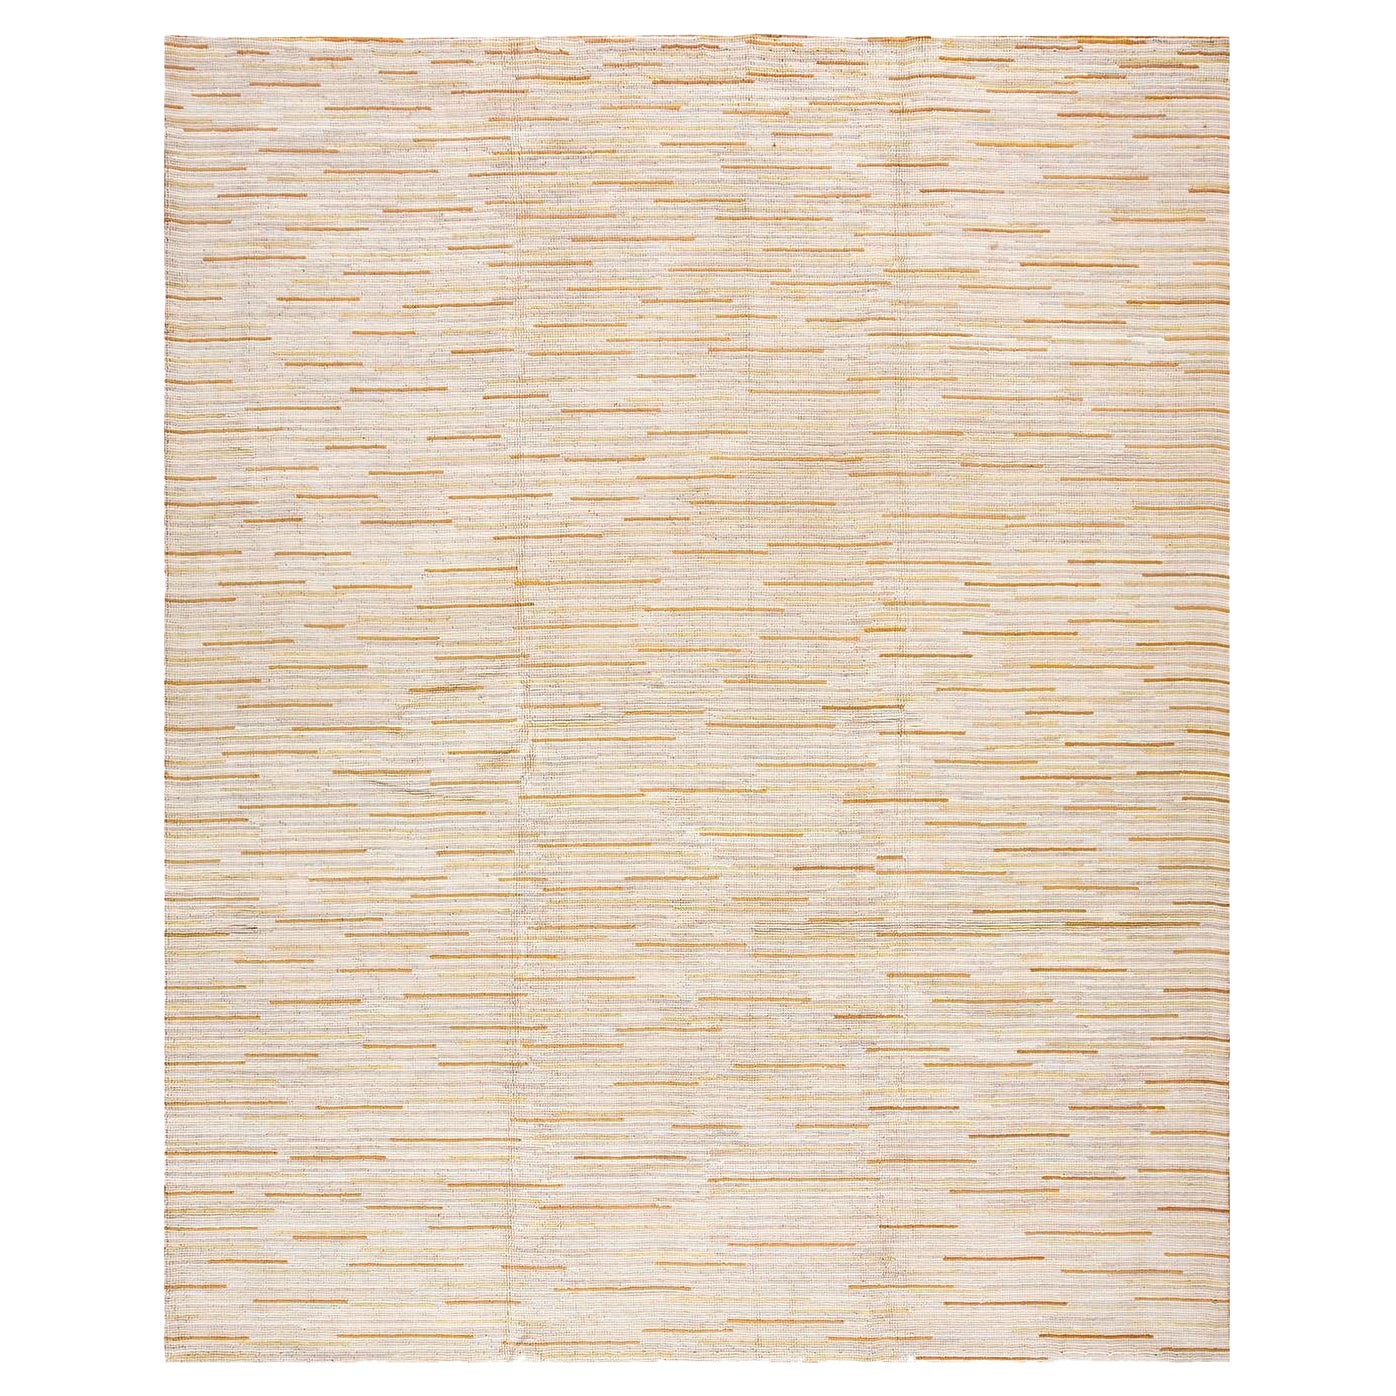 Contemporary American Hooked Rug (8' x 10' - 243 x 304 ) For Sale